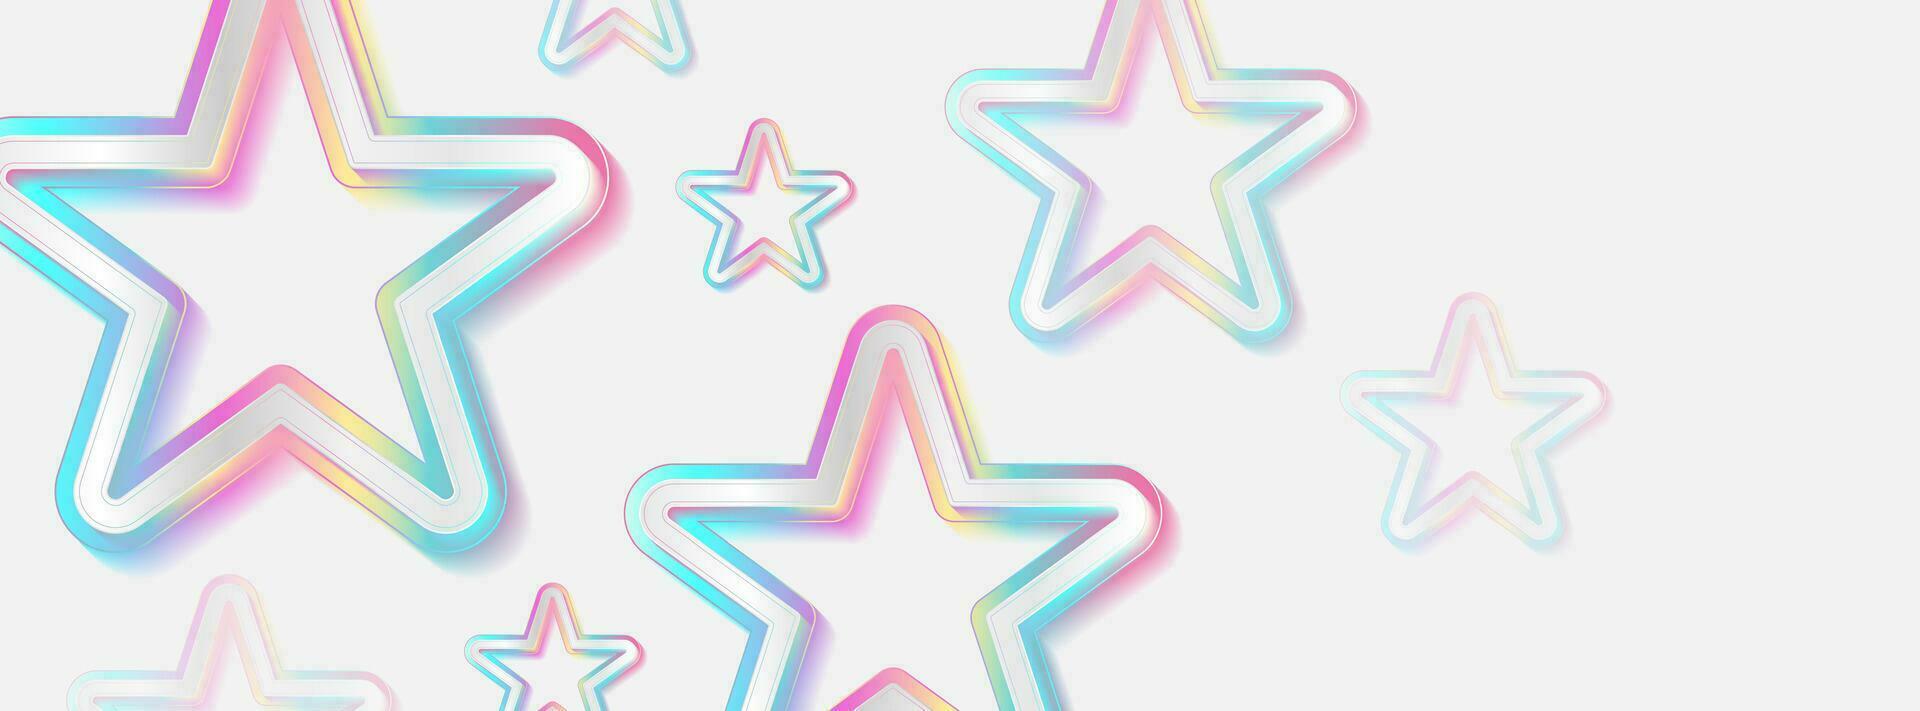 Holographic stars geometric abstract tech background vector